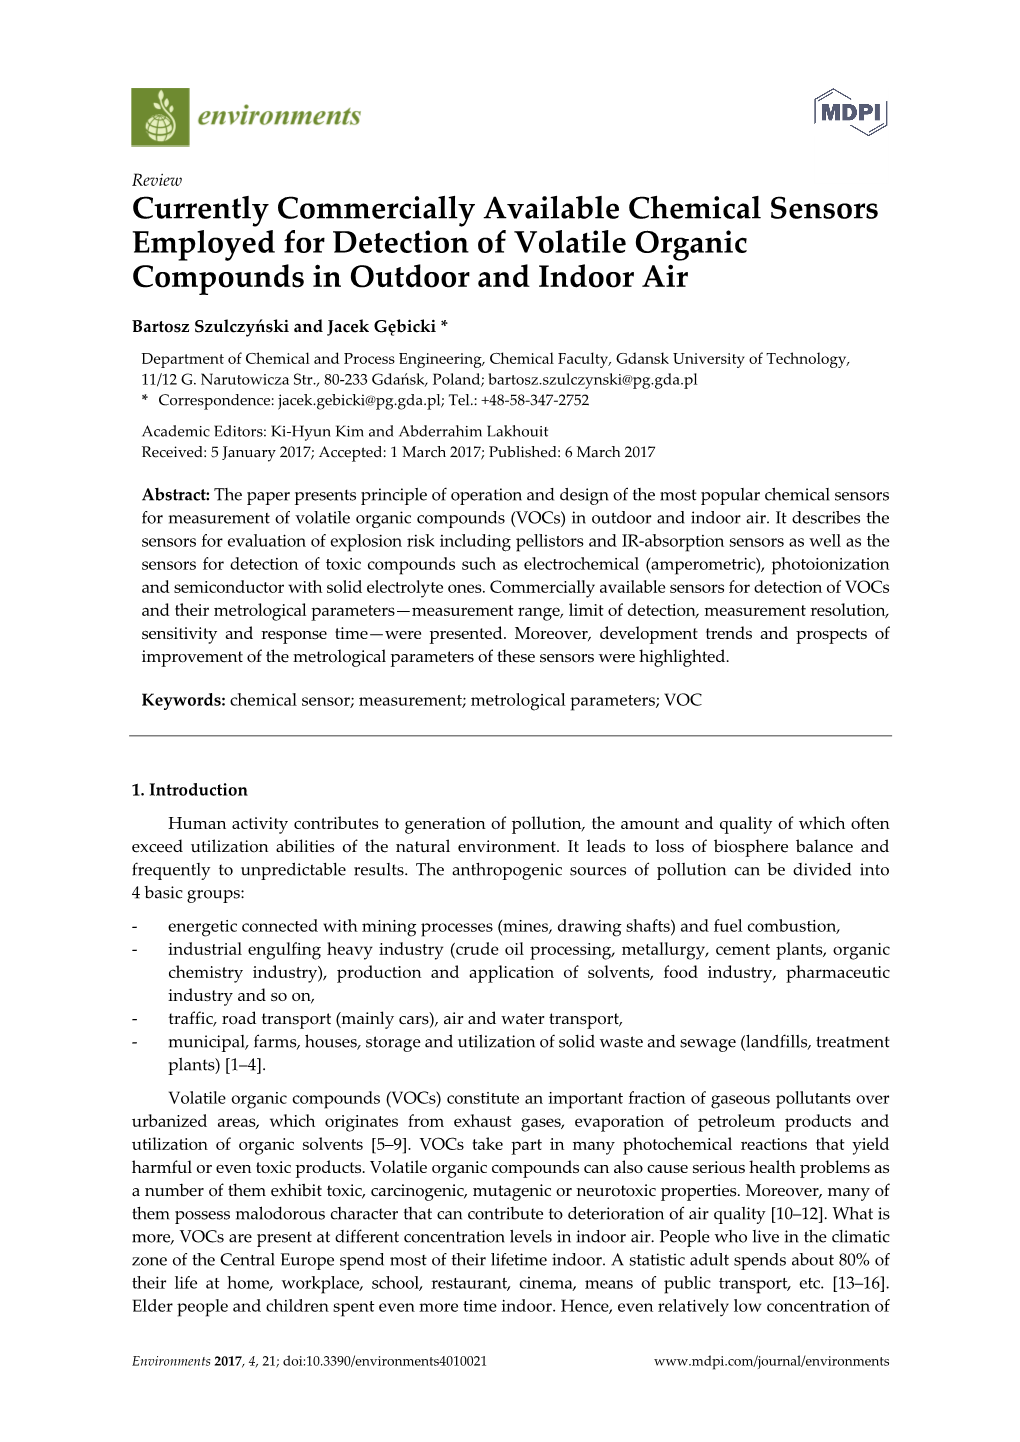 Currently Commercially Available Chemical Sensors Employed for Detection of Volatile Organic Compounds in Outdoor and Indoor Air